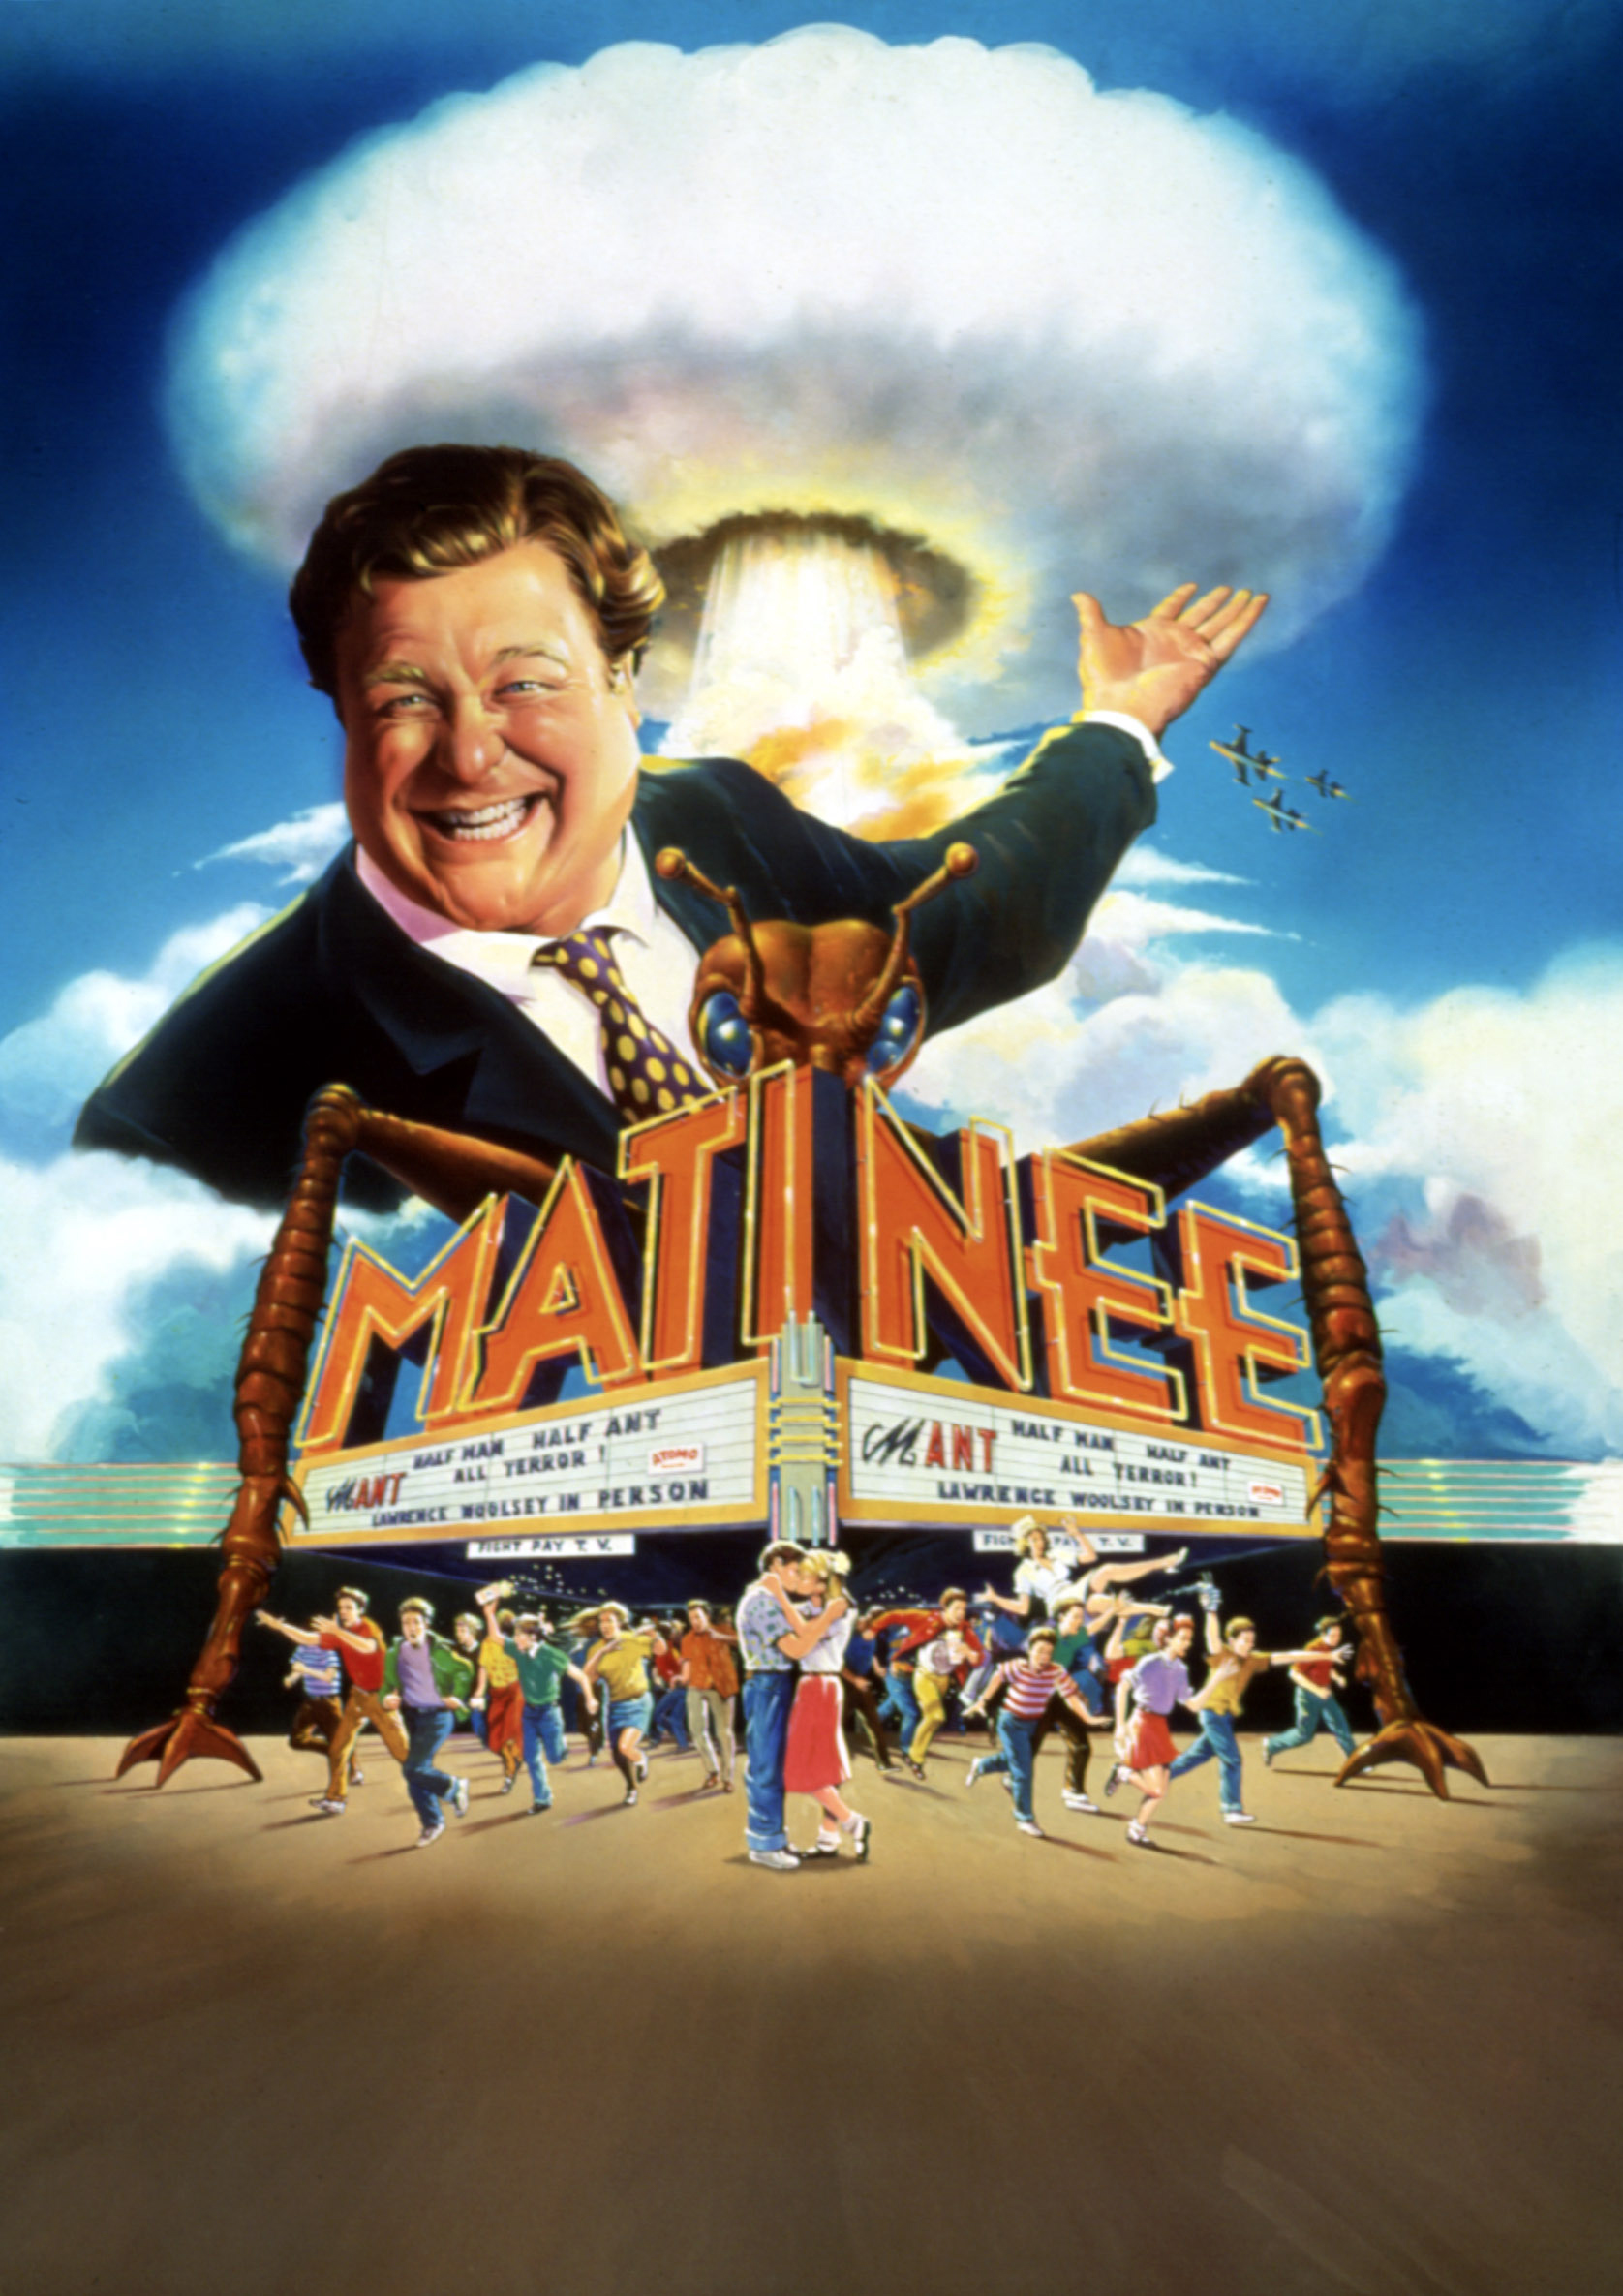 movie poster for the 1993 film "Matinee." It is an illustration of an early '60s movie theater, behind which is a nuclear mushroom cloud. In front of that cloud is John Goodman as his movie promoter character, grinning proudly above the theater's marquee, which has the films' title "Matinee," as well as the title of the film-within-the-film called "Mant!"